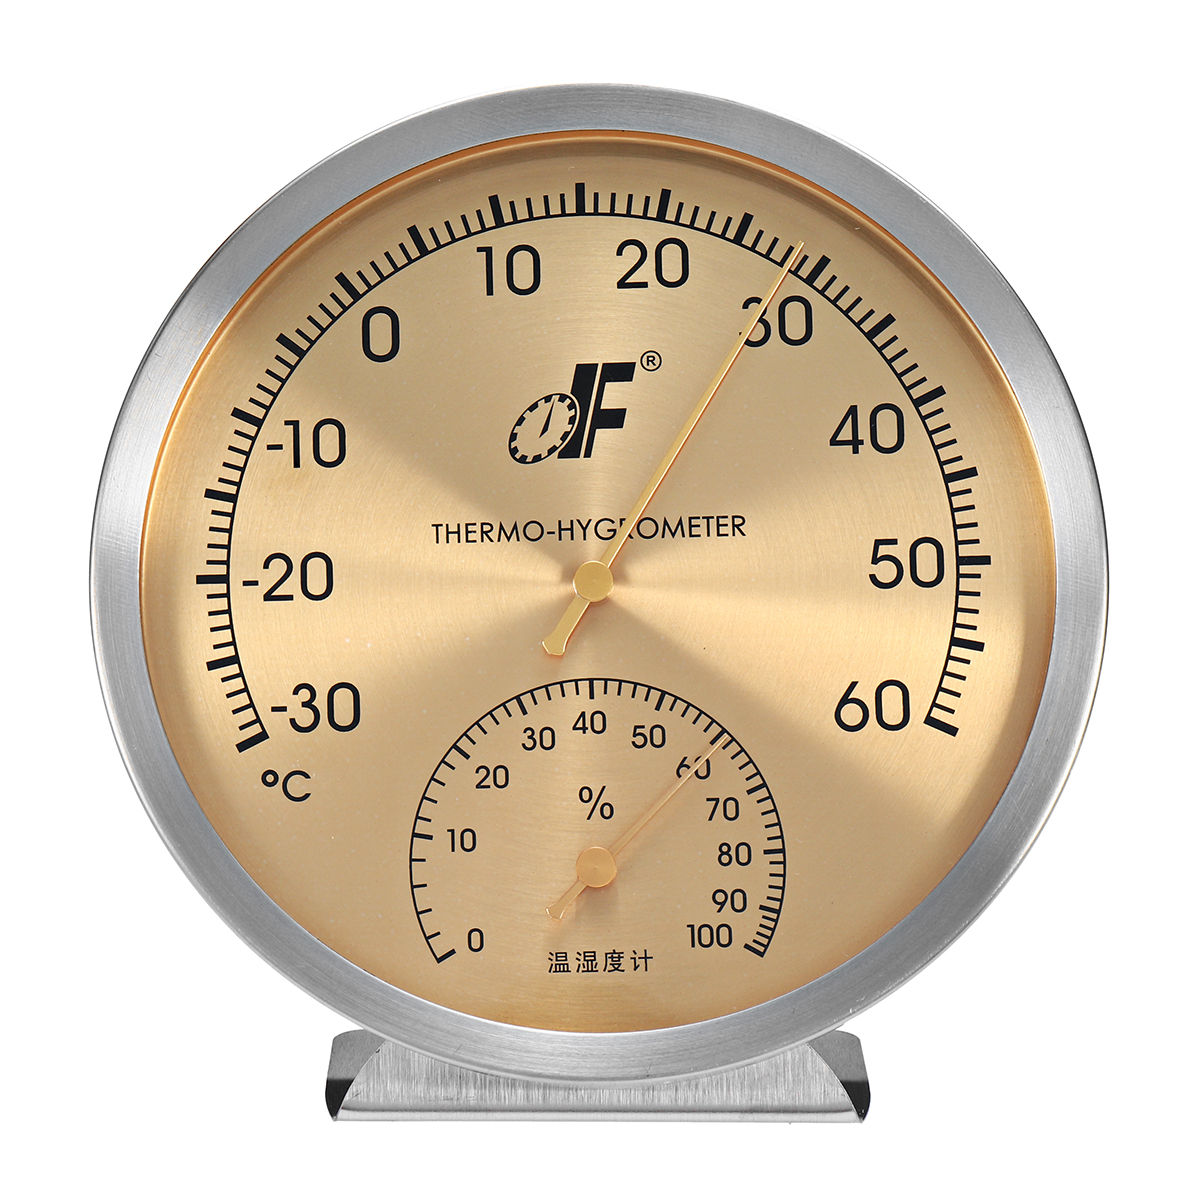 127mm-Weather-Station-Barometer-Thermometer-Hygrometer-Wall-Hanging--3060-0100Rh-1321146-3